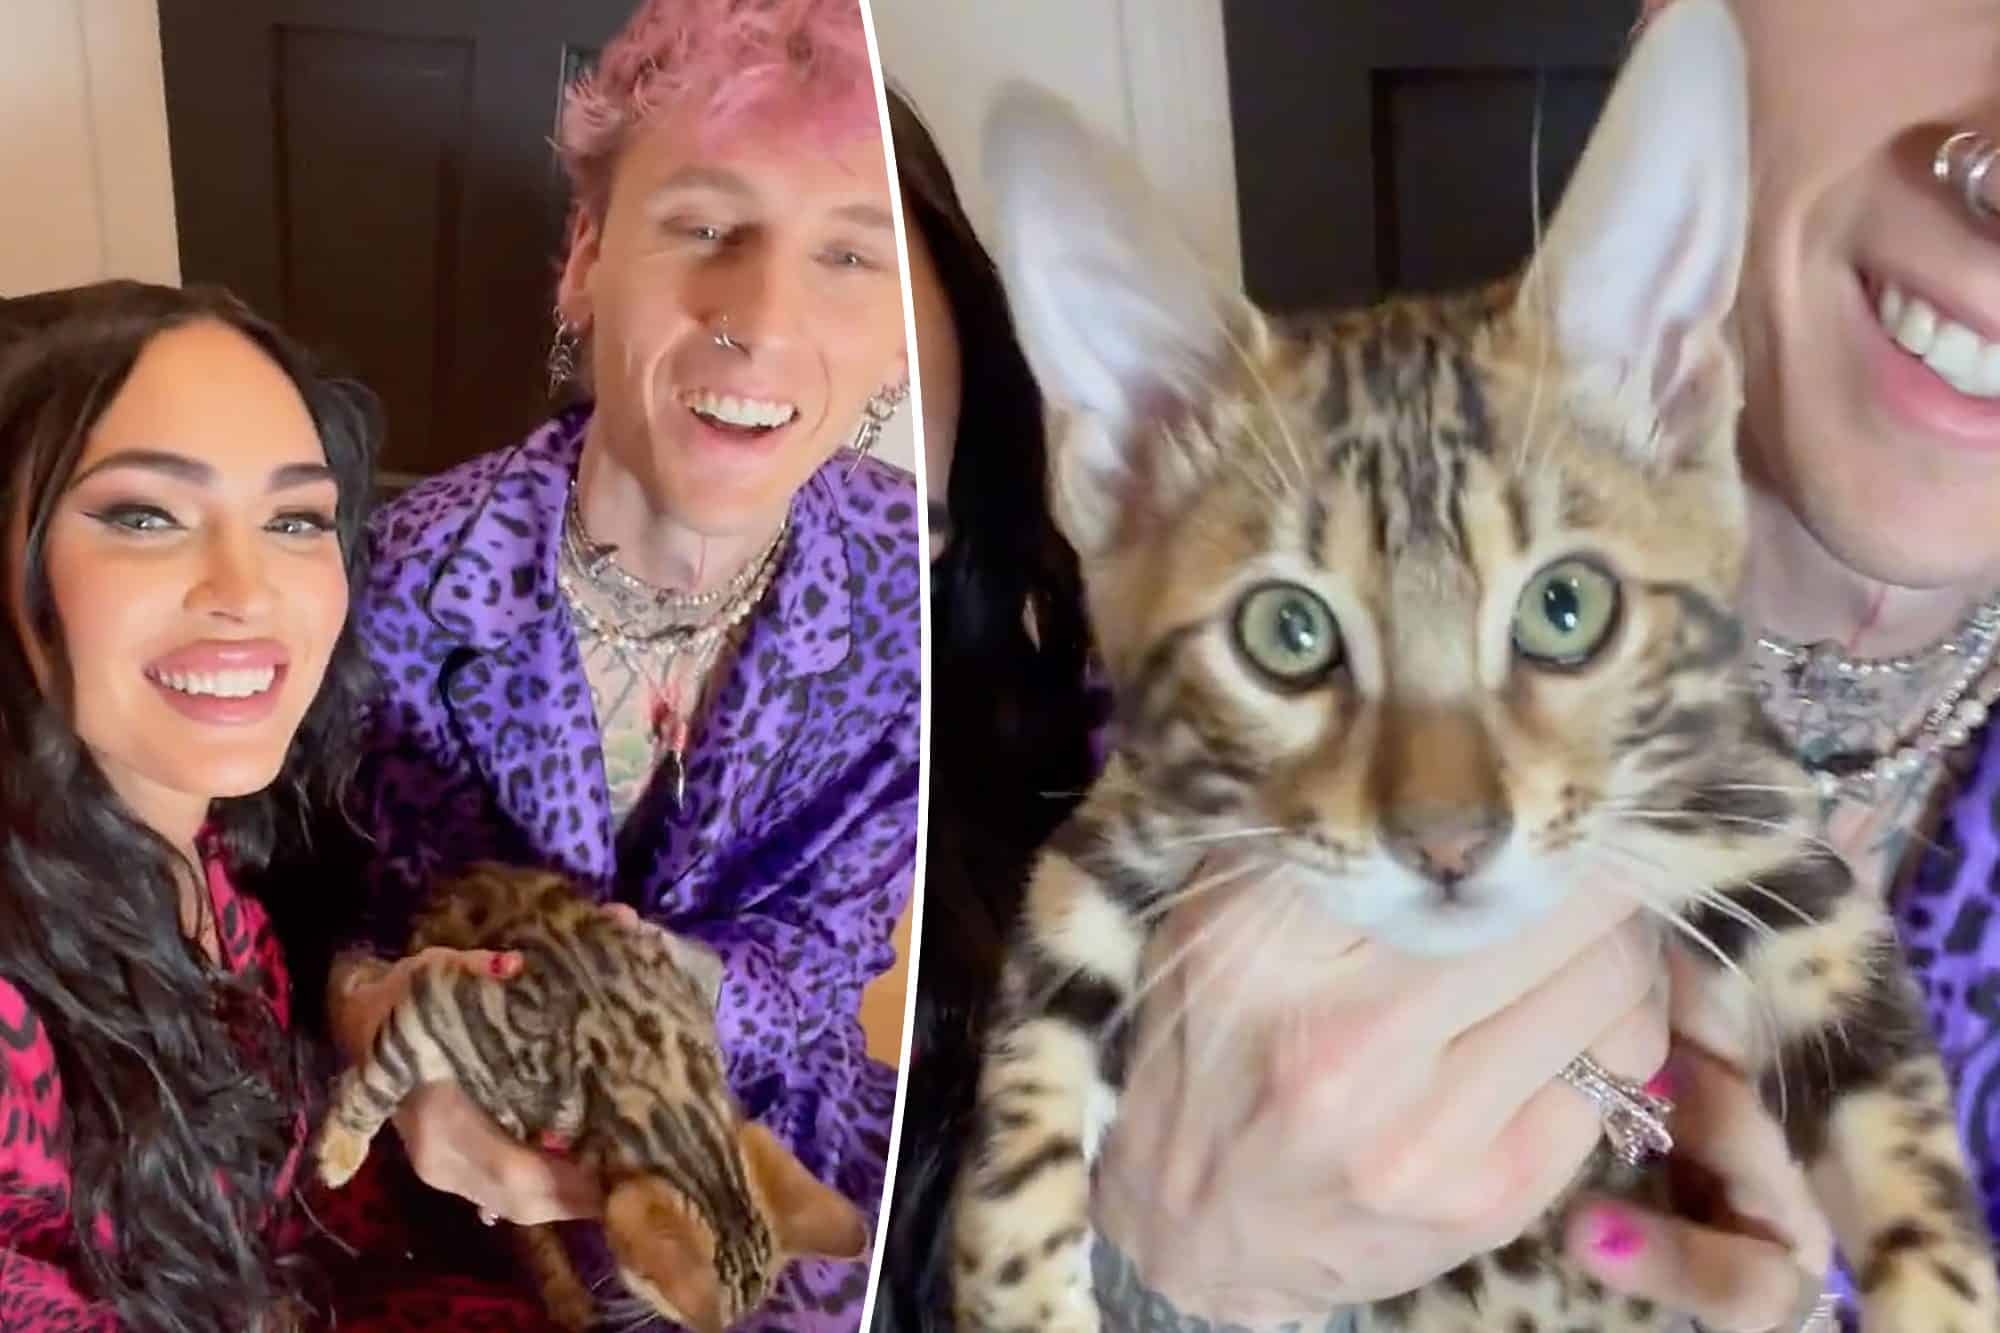 megan-fox-and-mgk-introduce-their-adorable-kitten-to-the-world